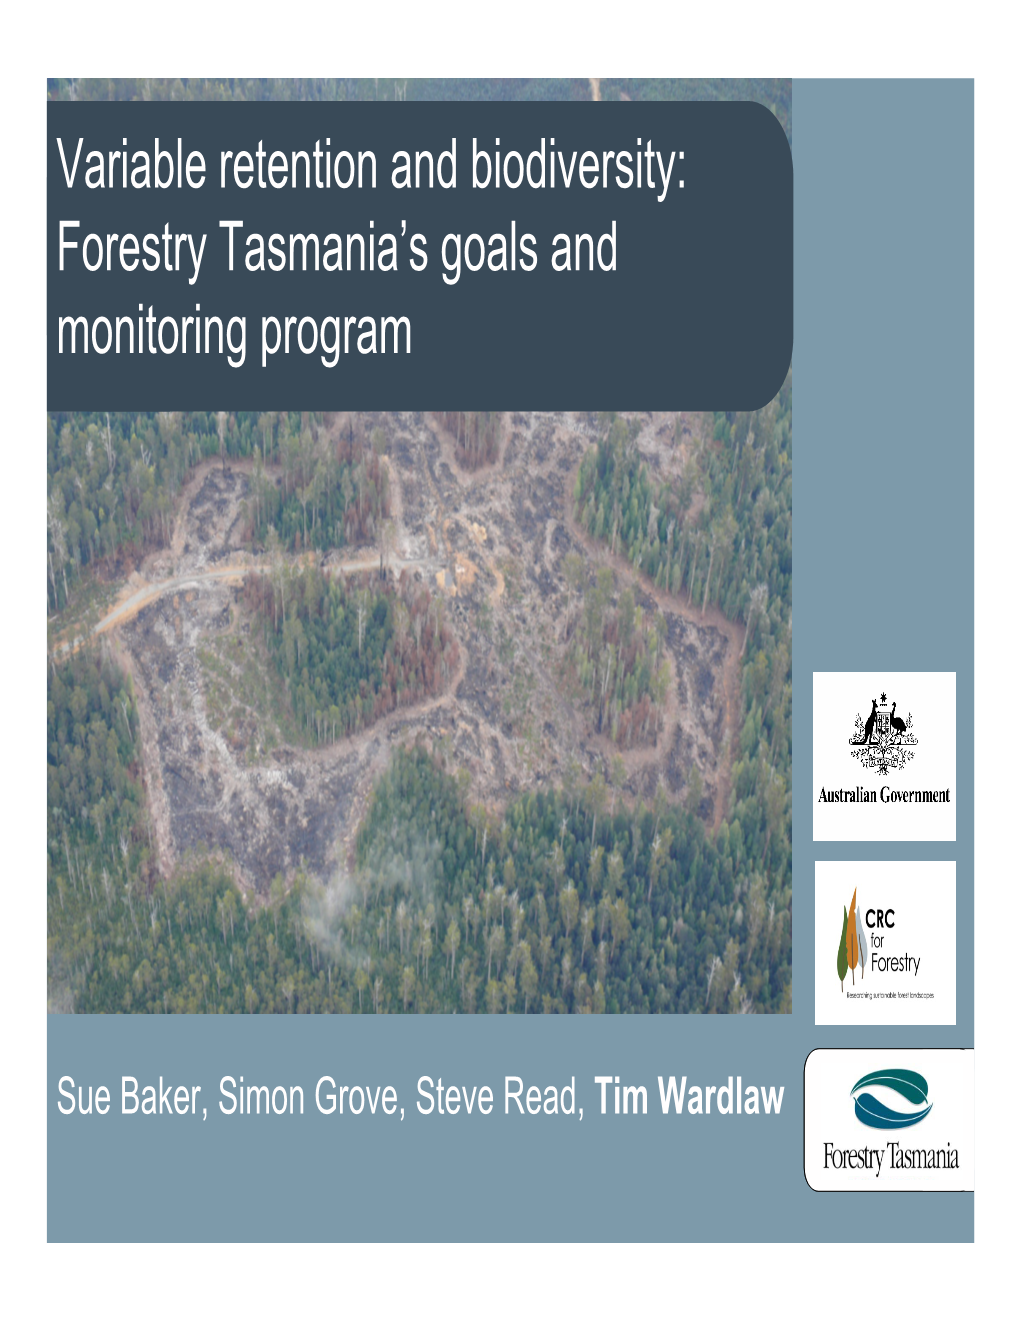 Variable Retention and Biodiversity: Forestry Tasmania's Goals And